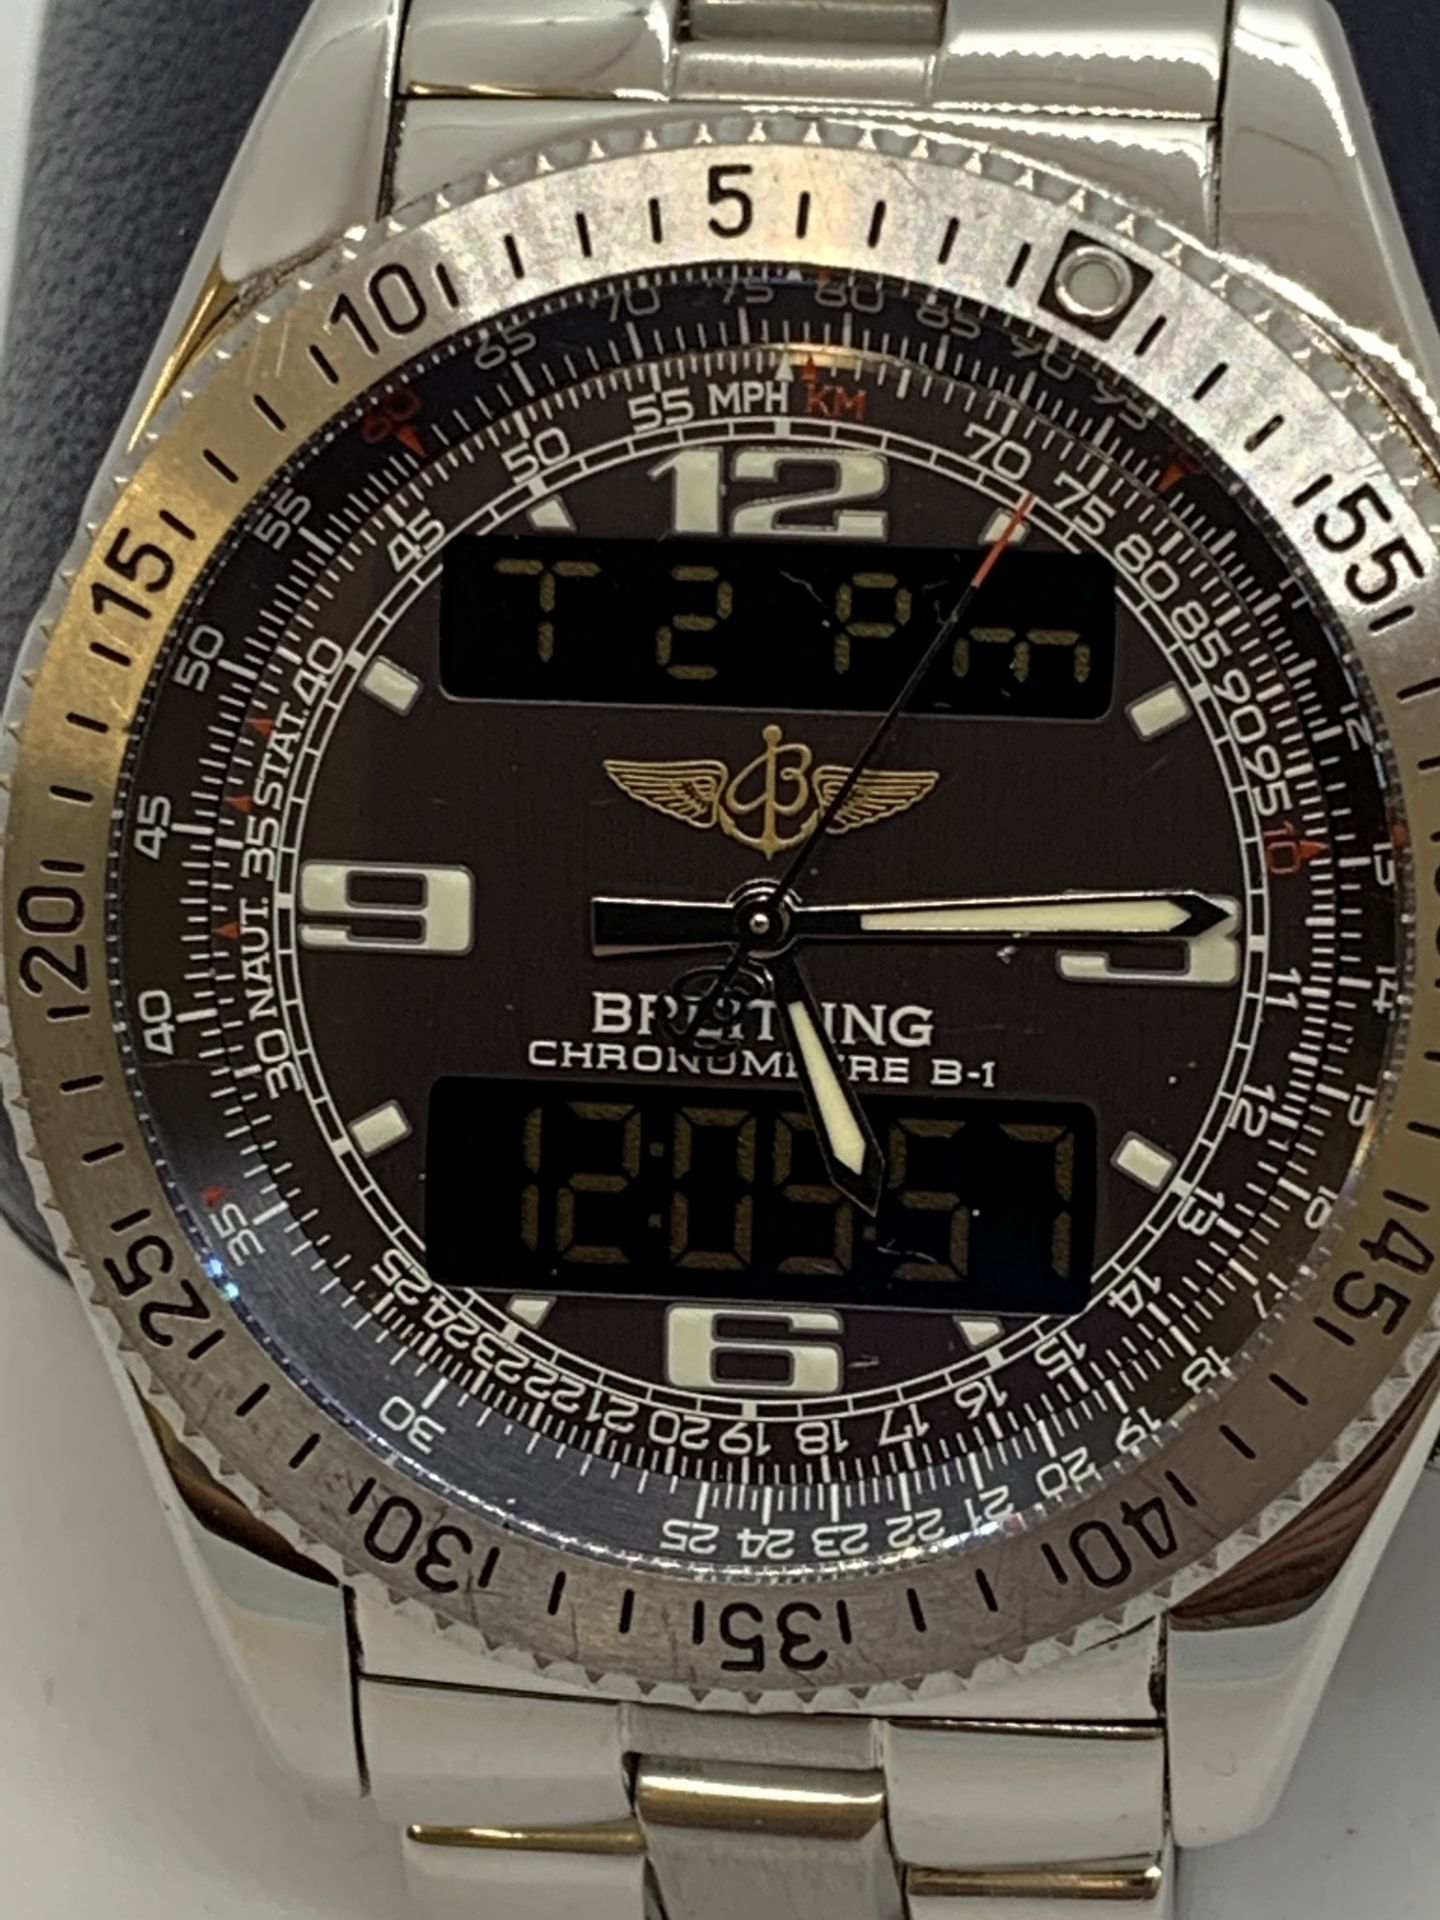 BREITLING CHRONO A78362 STAINLESS STEEL WATCH - Image 2 of 9